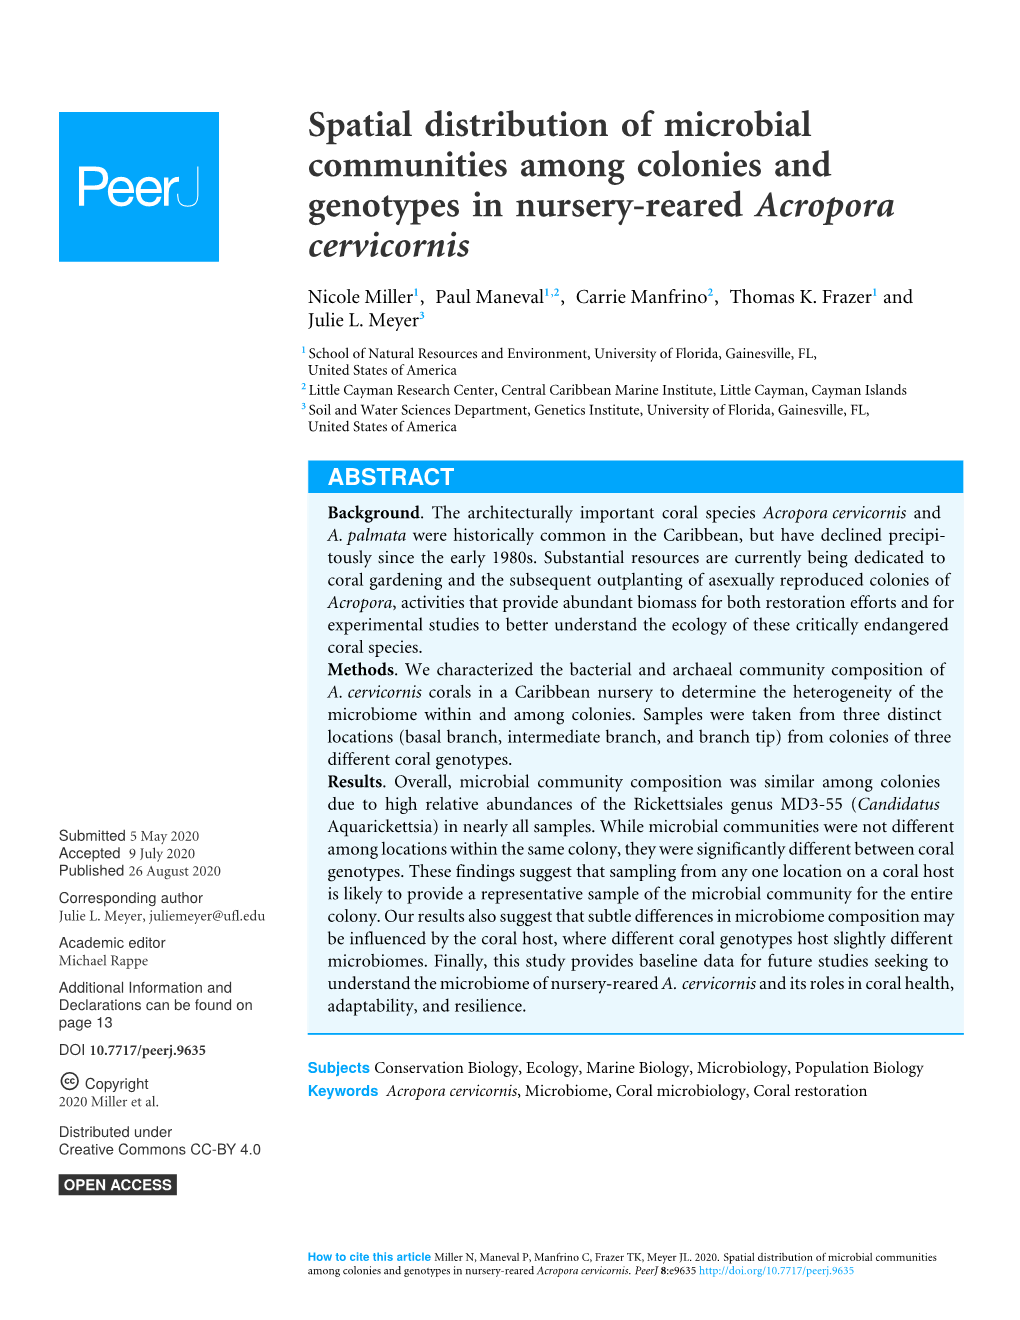 Spatial Distribution of Microbial Communities Among Colonies and Genotypes in Nursery-Reared Acropora Cervicornis